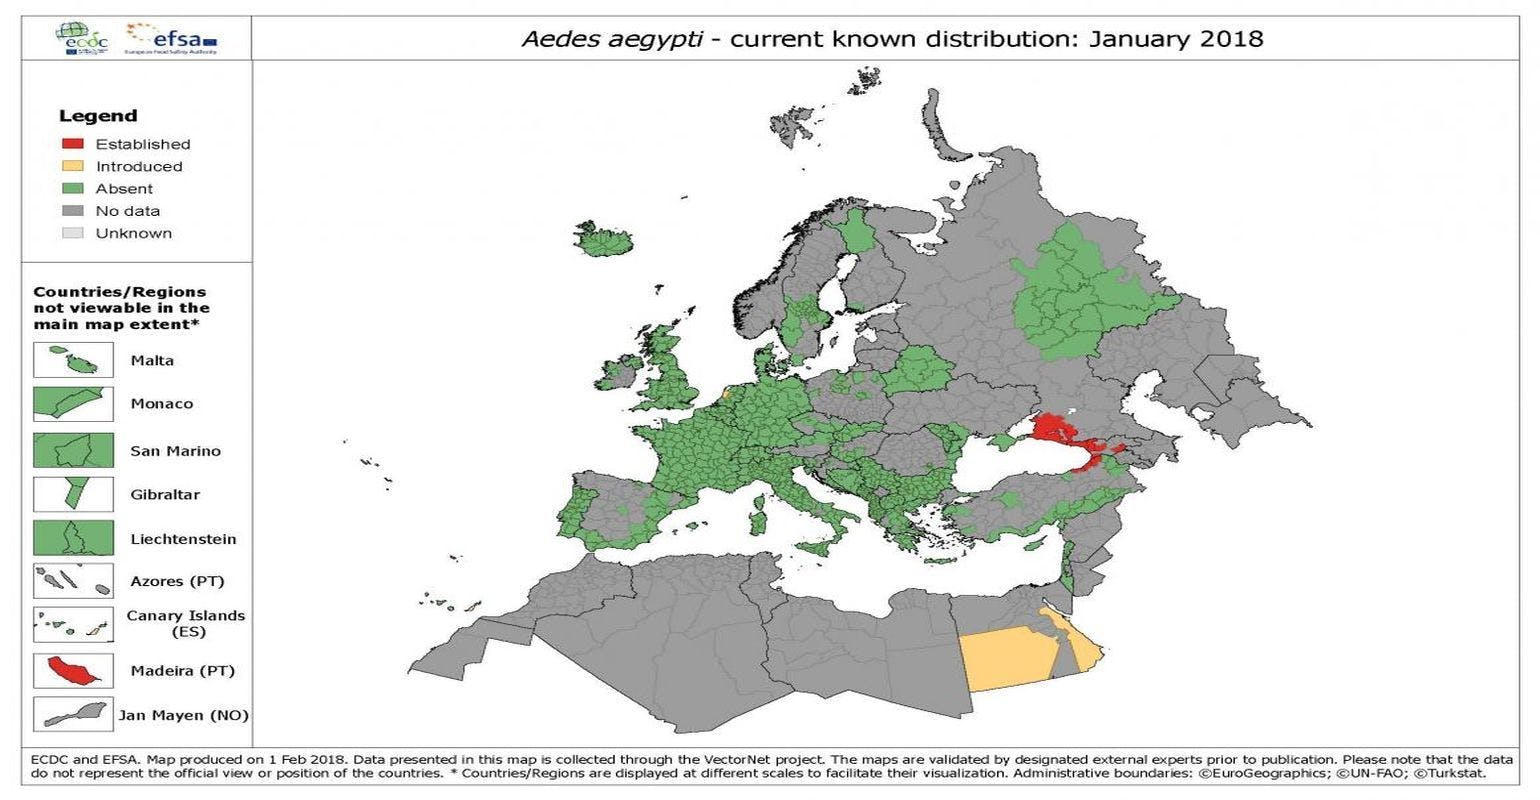 New Settlements of Aedes aegypti Raising Concerns for Continental European Union